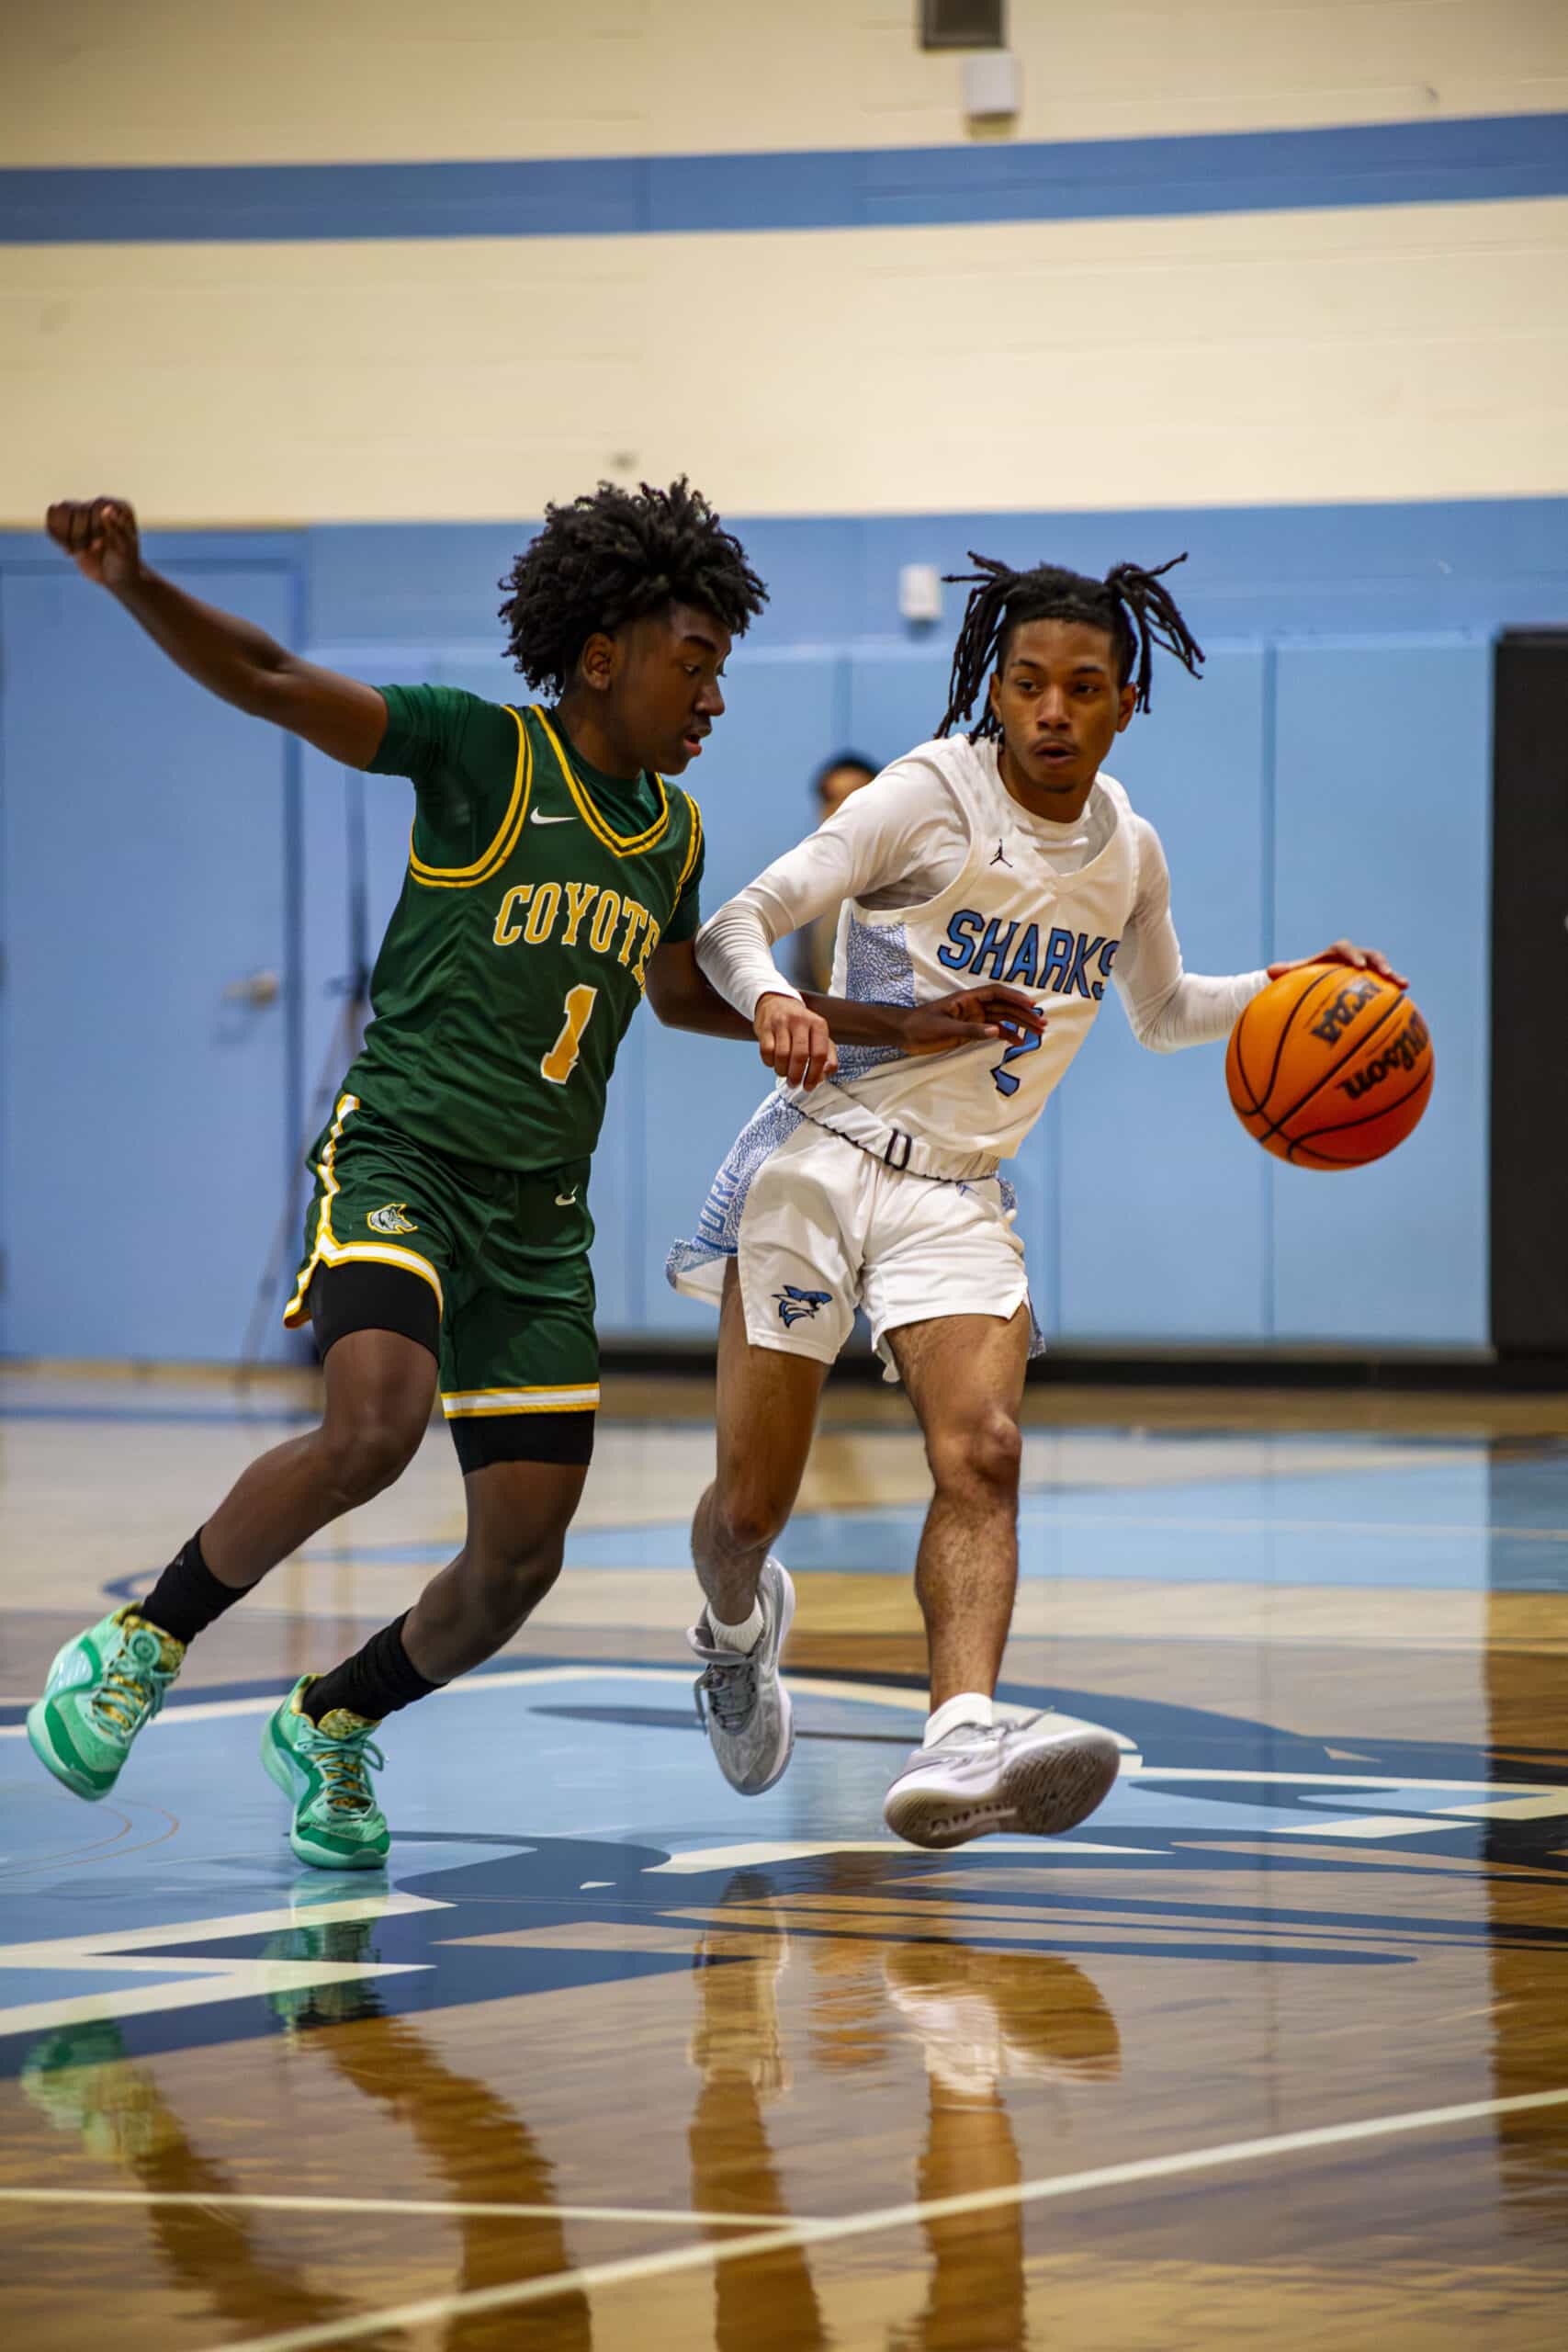 Nature Coast Christmas Tournament: NCT vs. Cypress Creek Coyotes. Photo by Hanna Maglio.